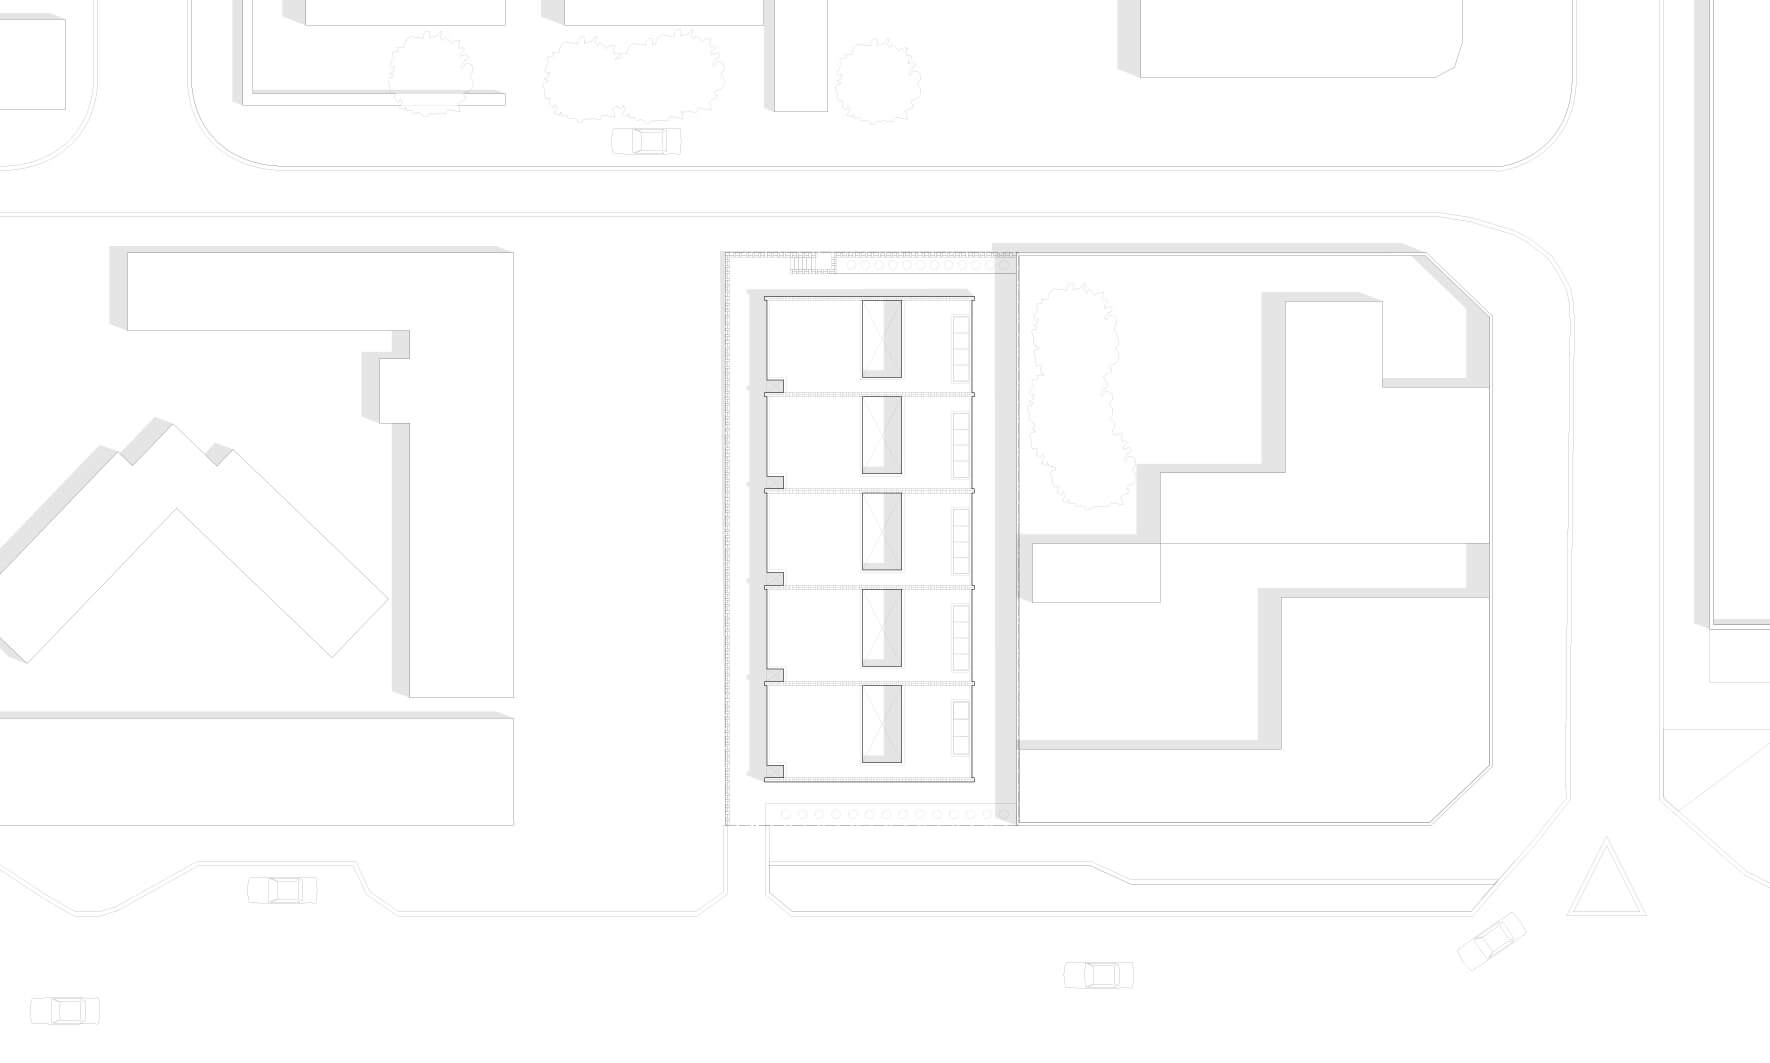 Zoomed In Roof Plan showing the surrounding buildings and streets